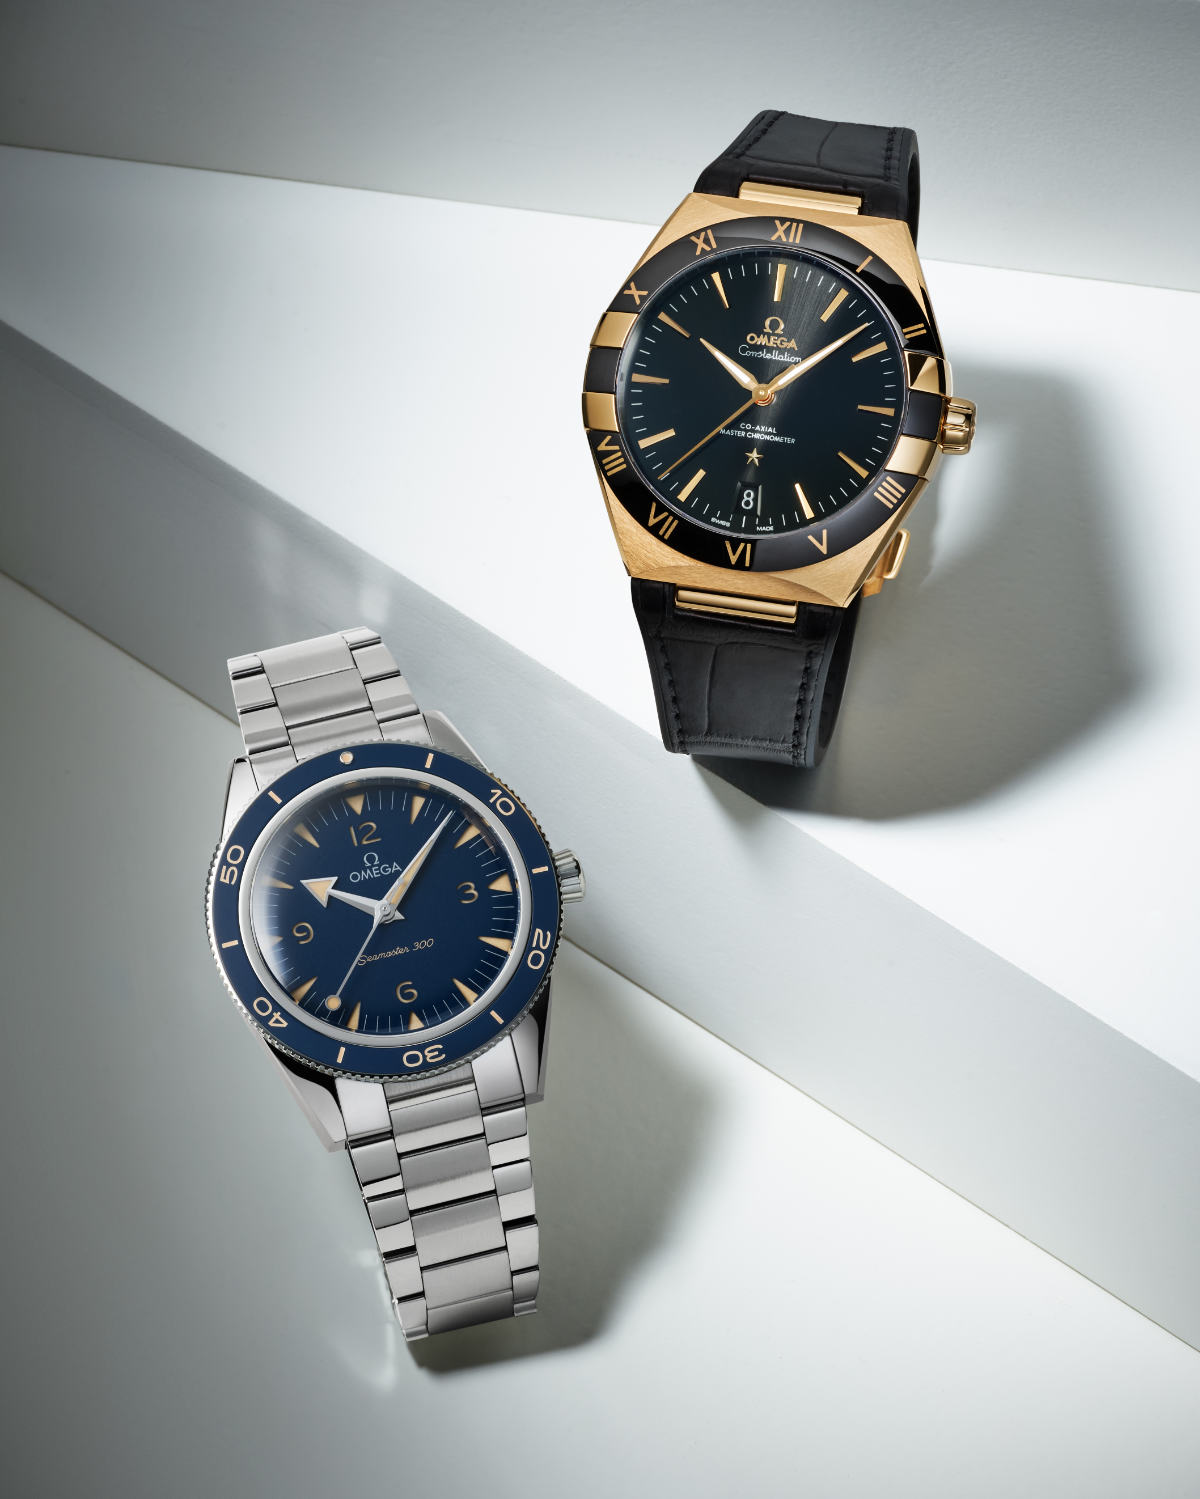 Omega: Happy Father’s Day - Celebrating the man of the hour